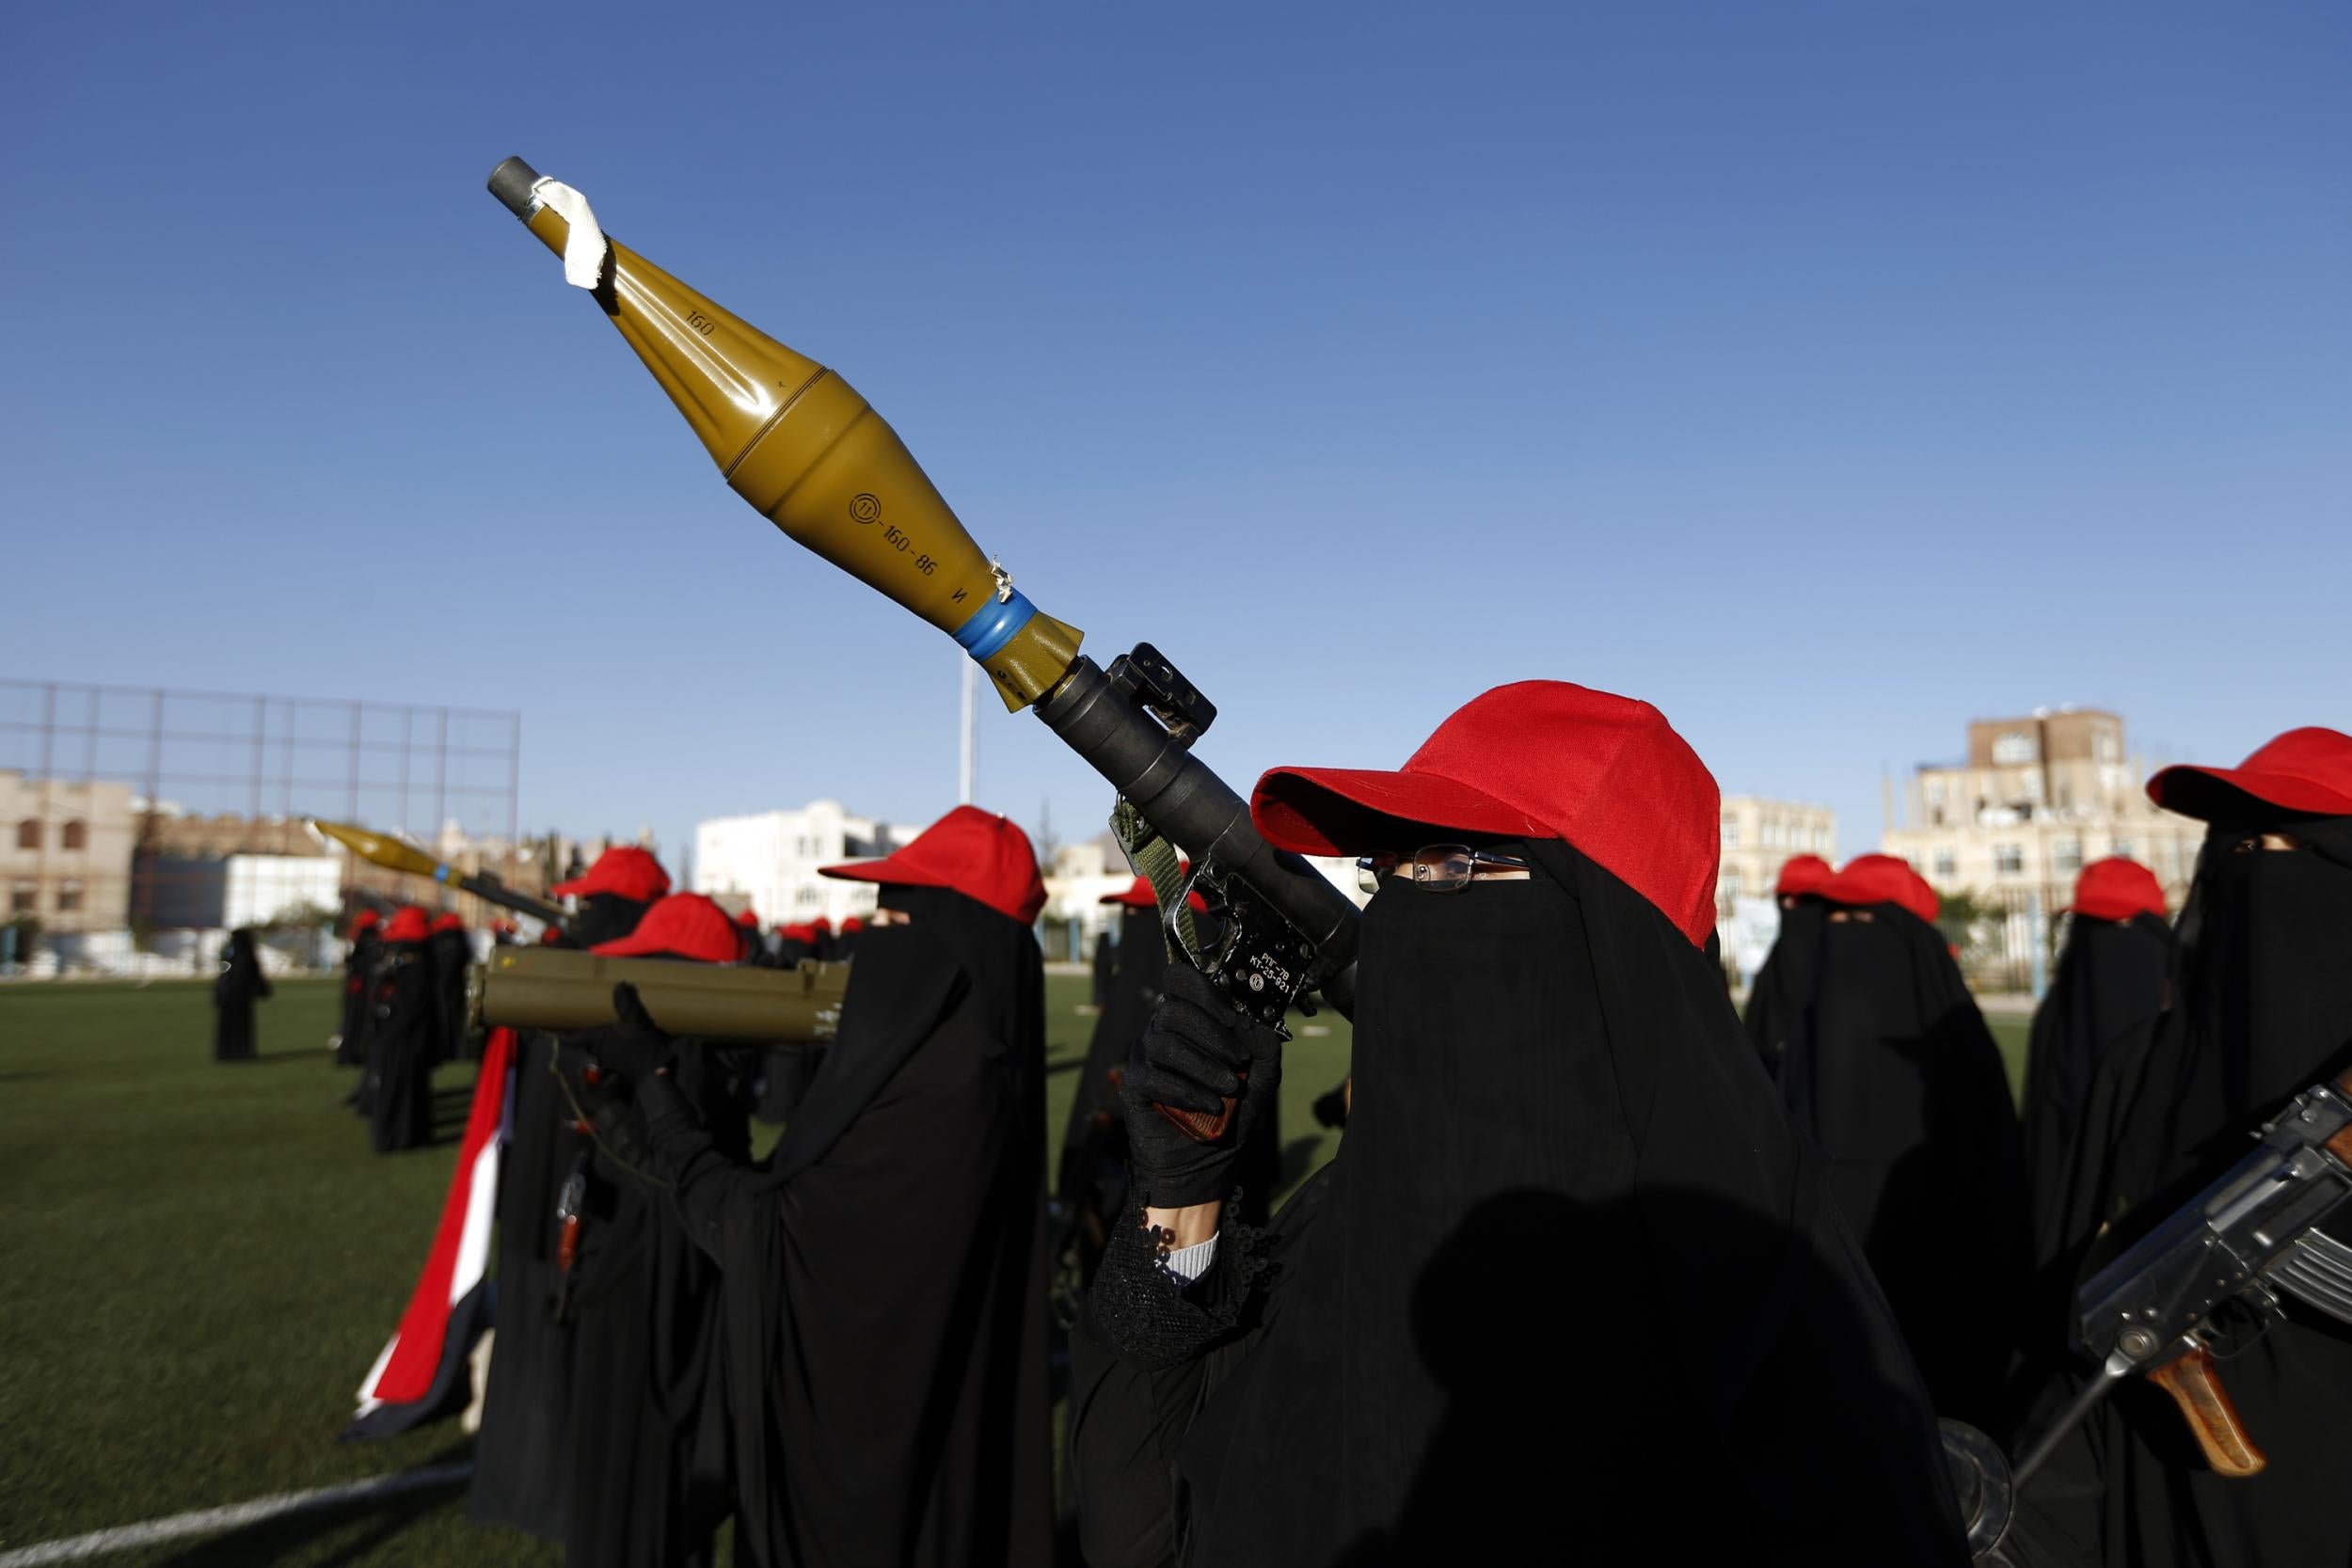 Women hold rocket launchers and sport red caps in support of the Huthi rebel movement